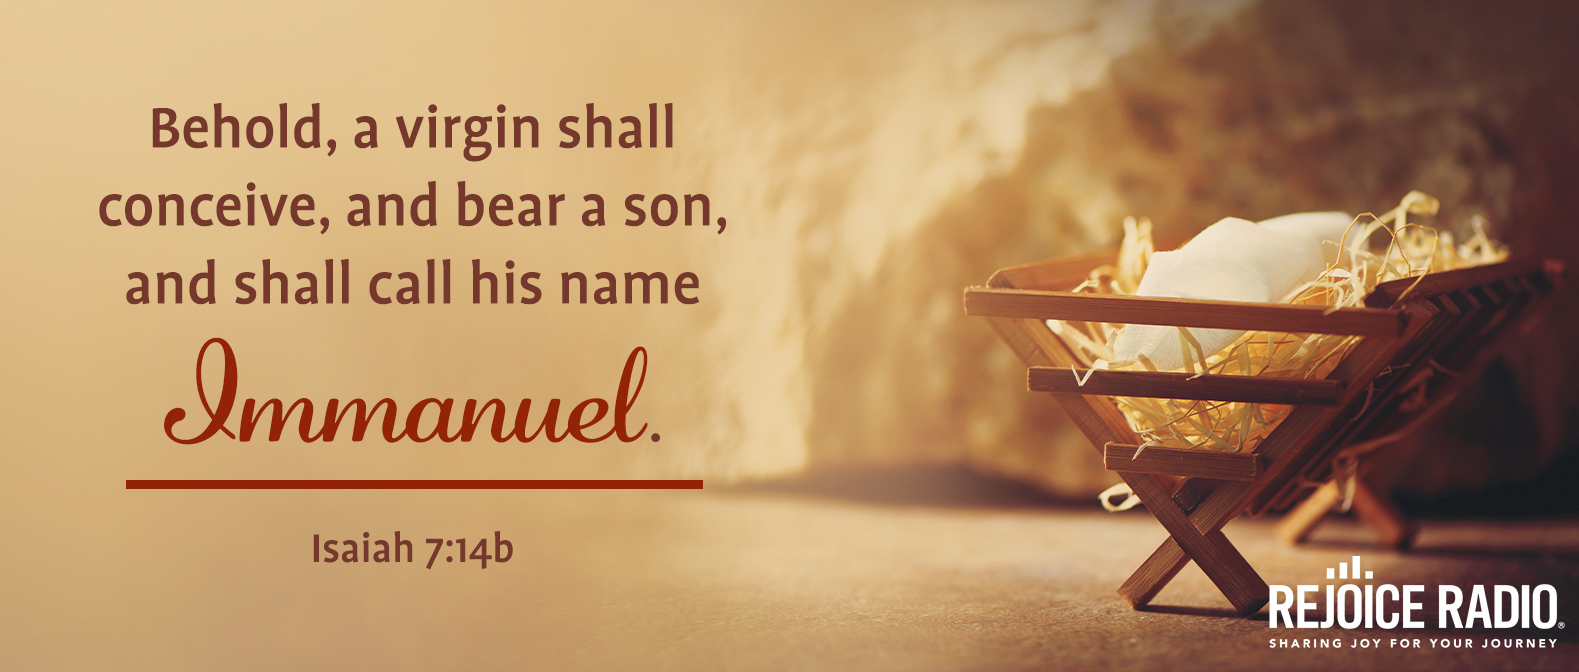 December 1-31 verse slider - Behold a virgin shall conceive, and bear a son, and shall call his name Immanuel. Isaiah 7:14b